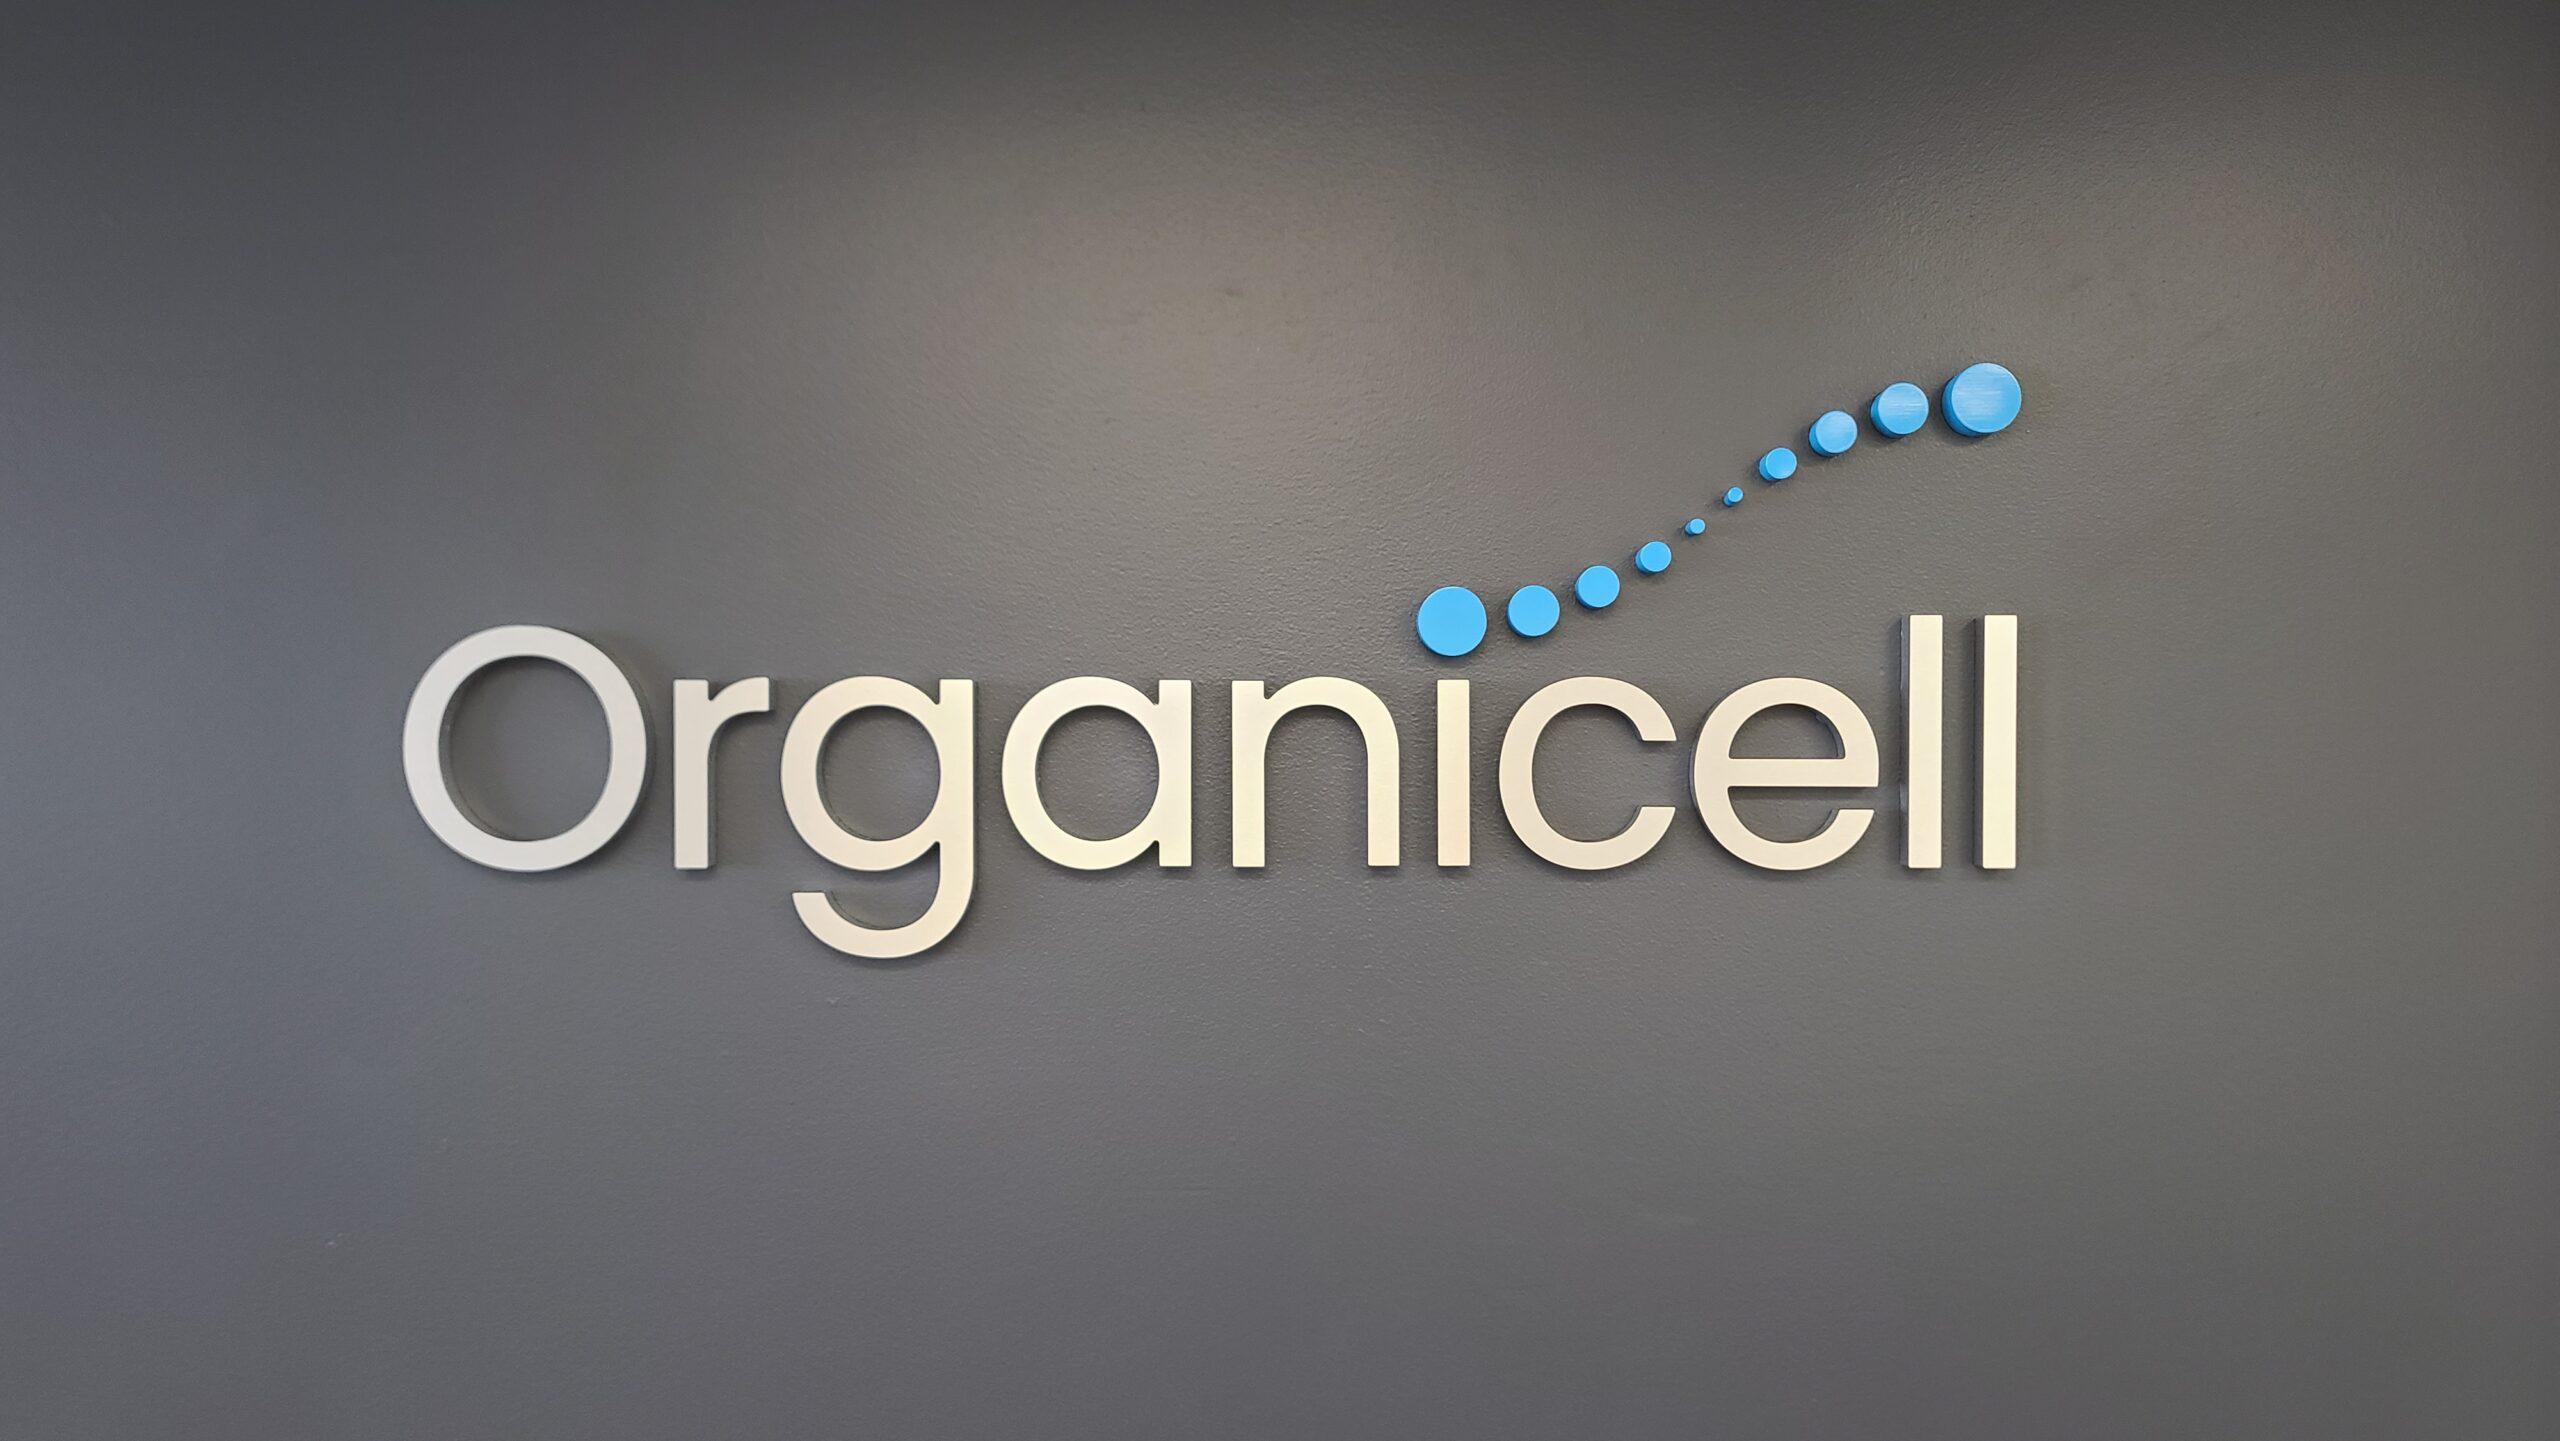 You are currently viewing Acrylic Letter Lobby Signs for Organicell in Los Angeles